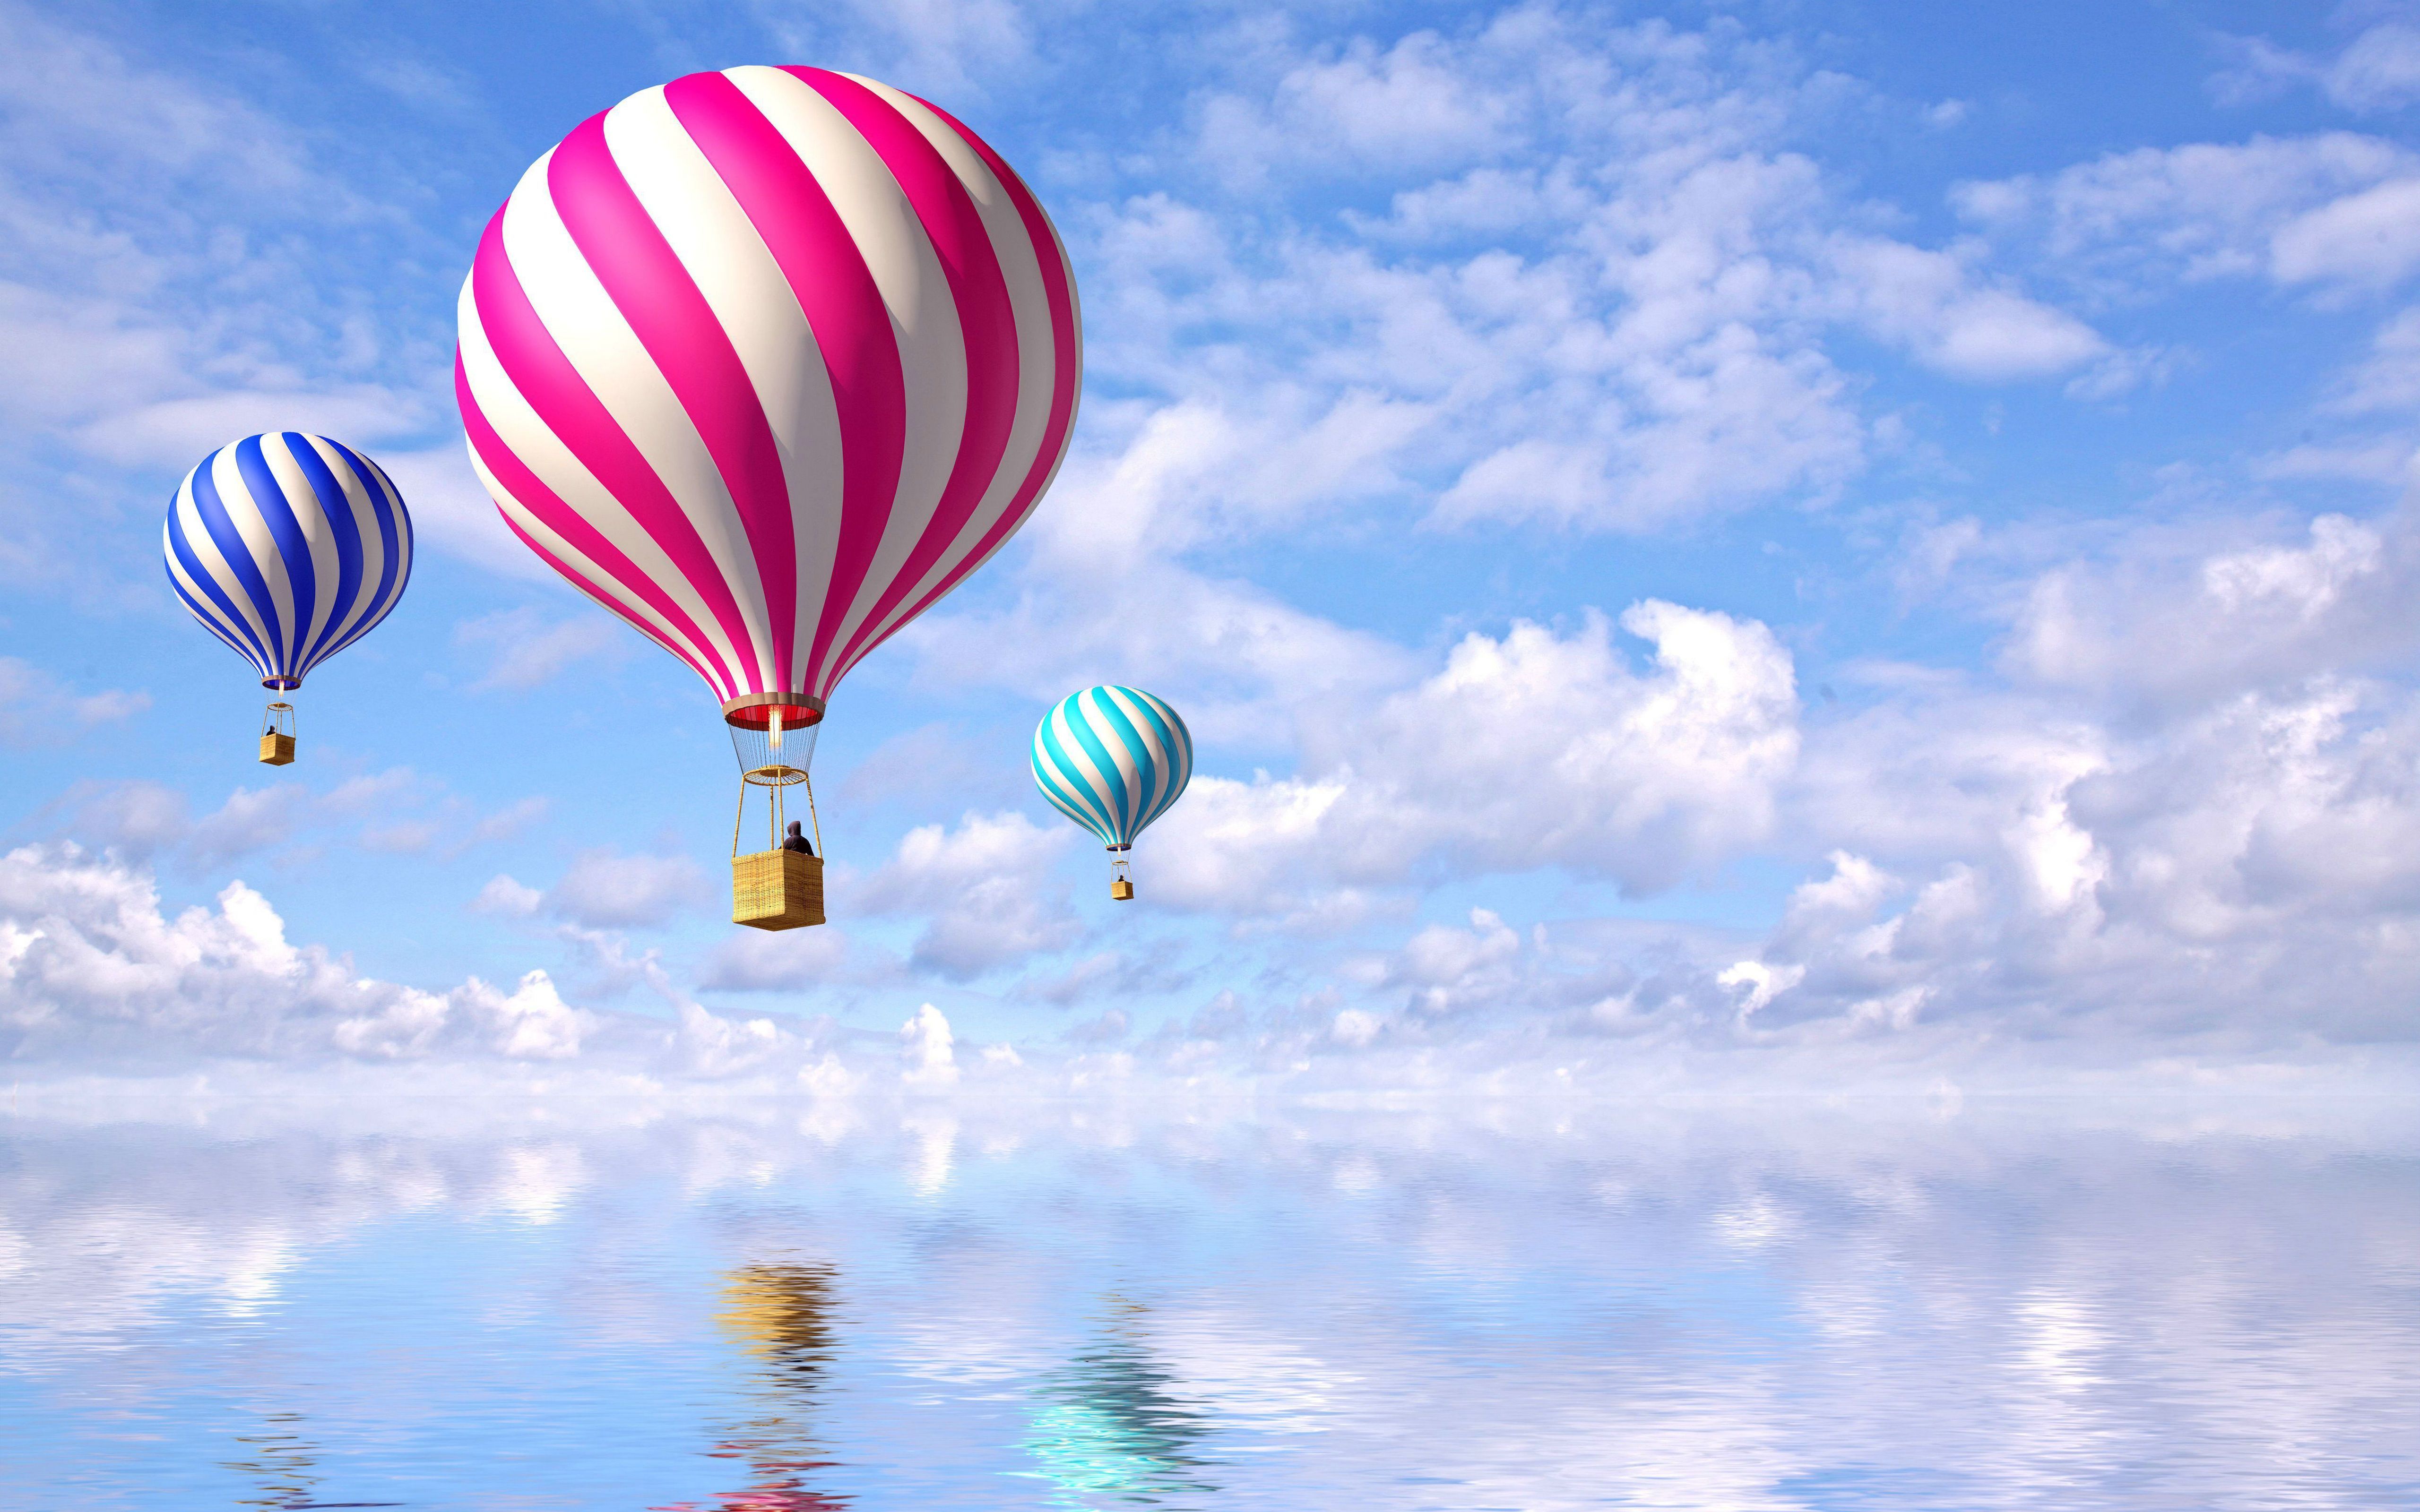 Hot Air Balloons can do more than just walk on water. Description from .c. Photography backdrops, Photography backdrop, Blue sky photography